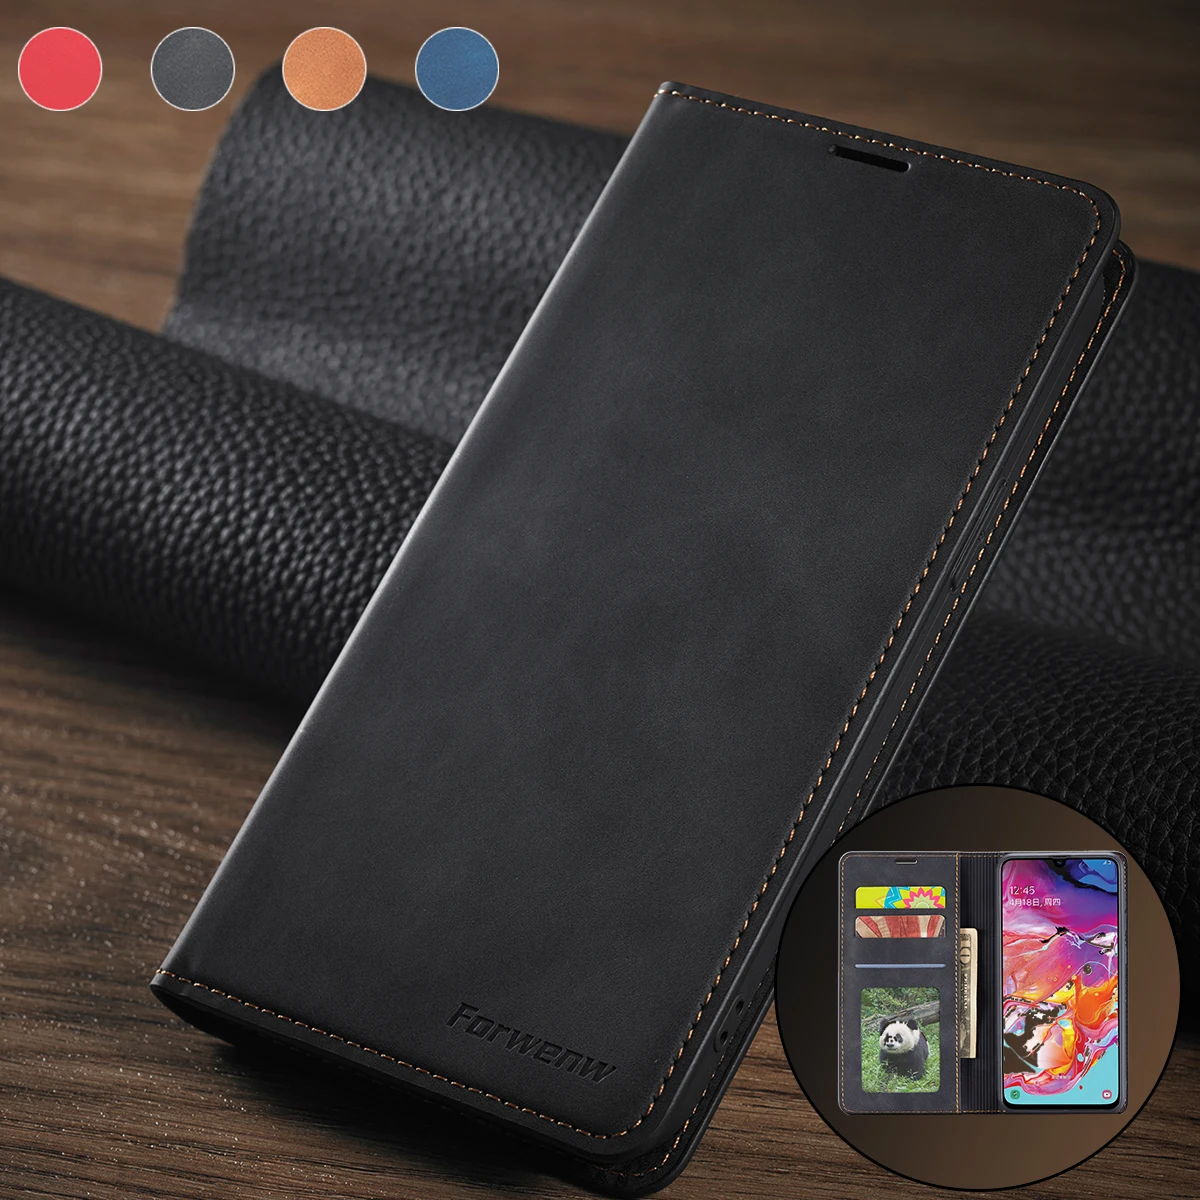 

Wallet leather Case For Samsung Galaxy A51 A52 A60 A70 A71 A72 A80 A81 A82 A90 A91 A530 A750 M02 M10 M12 M62 M40 M60 M80 S Cases